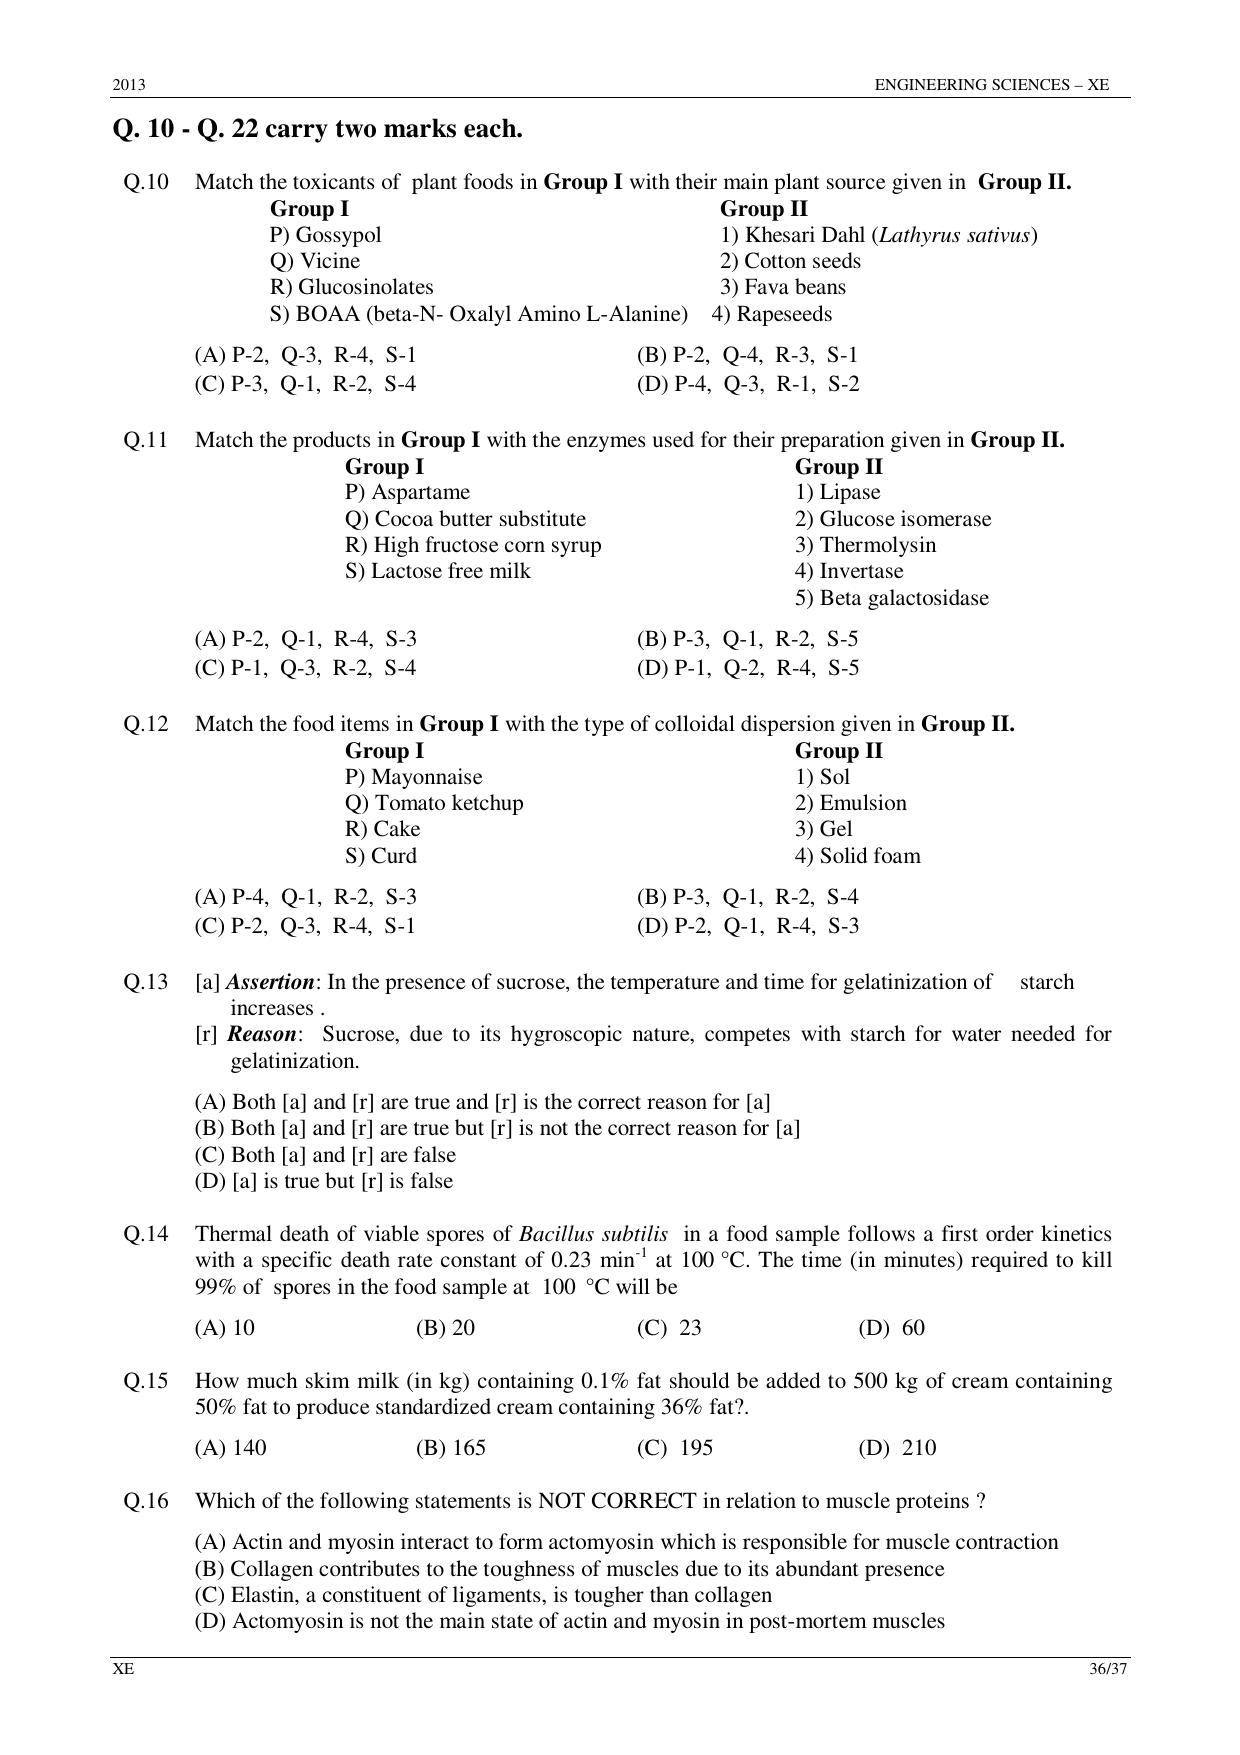 GATE 2013 Engineering Sciences (XE) Question Paper with Answer Key - Page 36